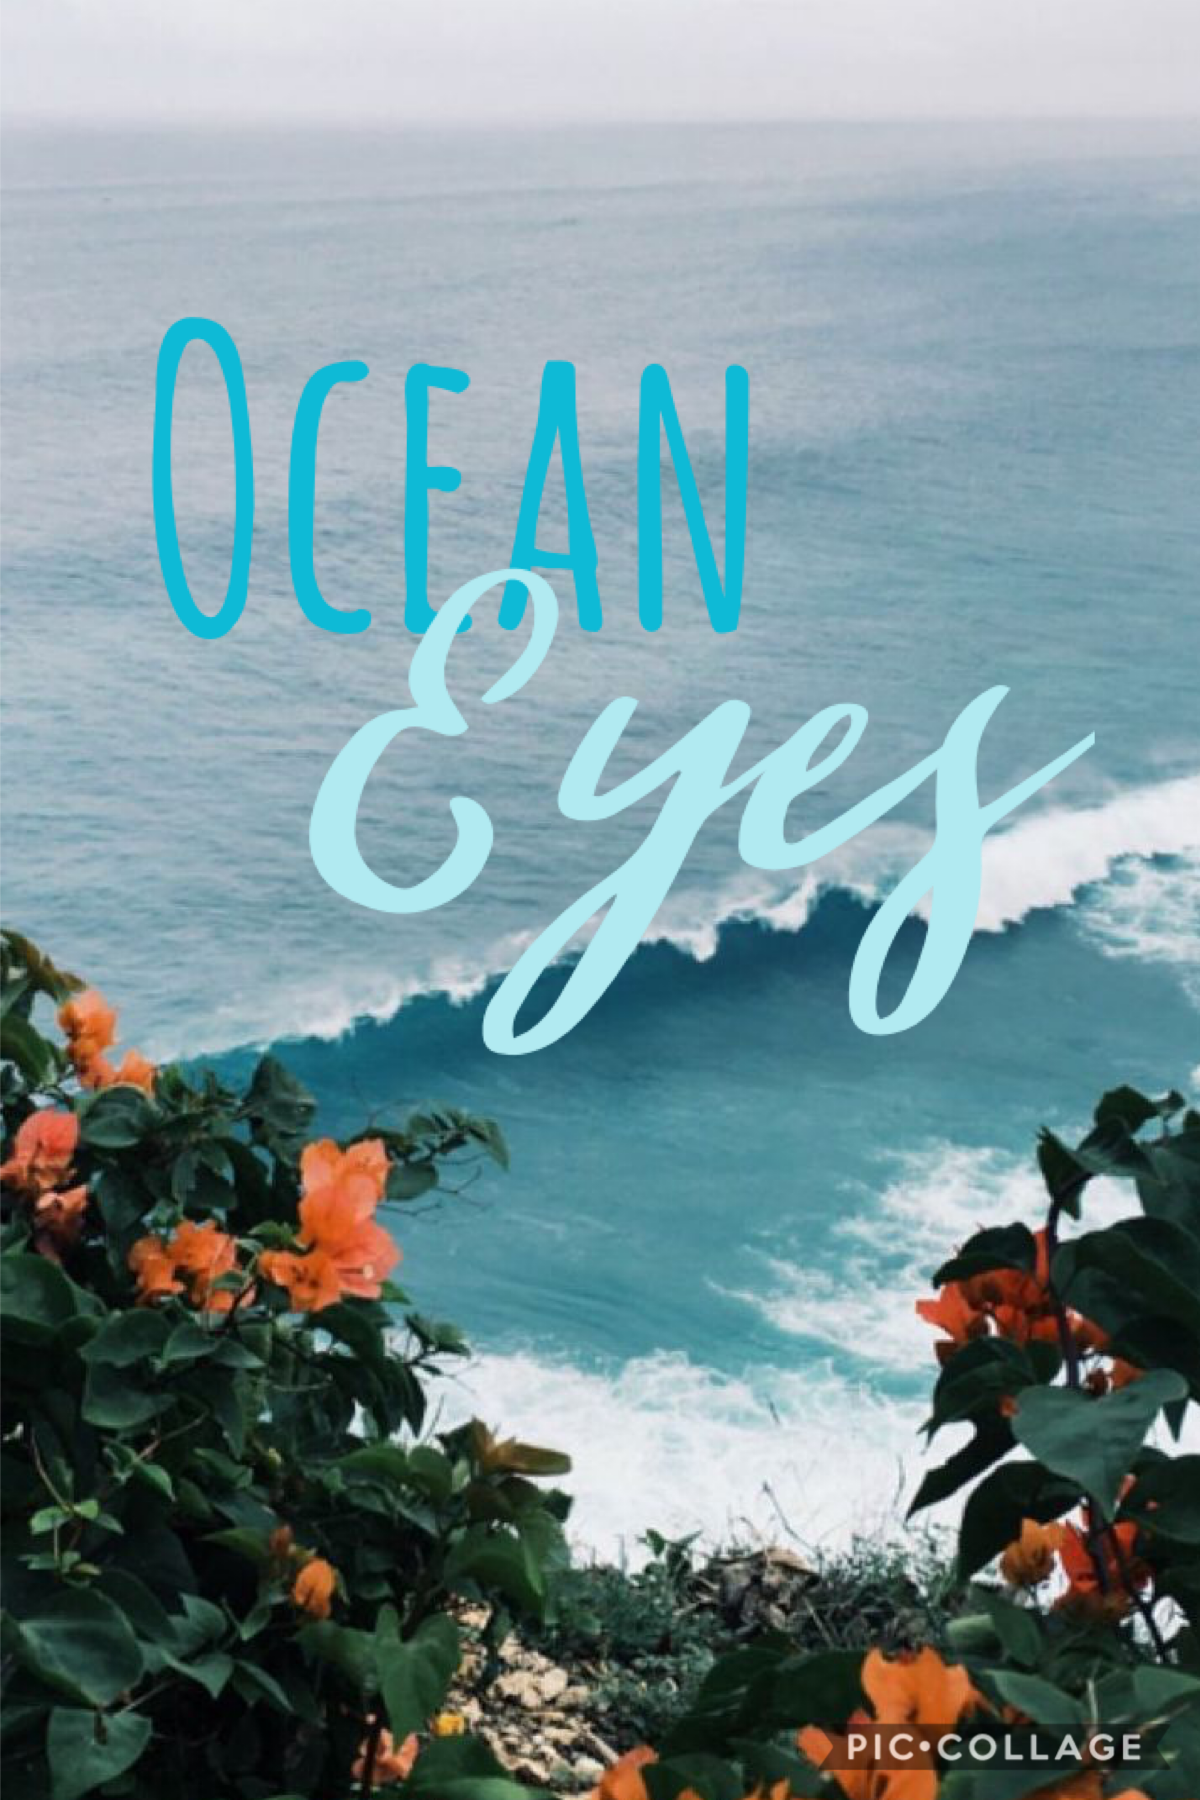 Ocean eyes by Billie Eilish and yes I think I did a collage on this song a while  ago but I’m making another one lol 😂 